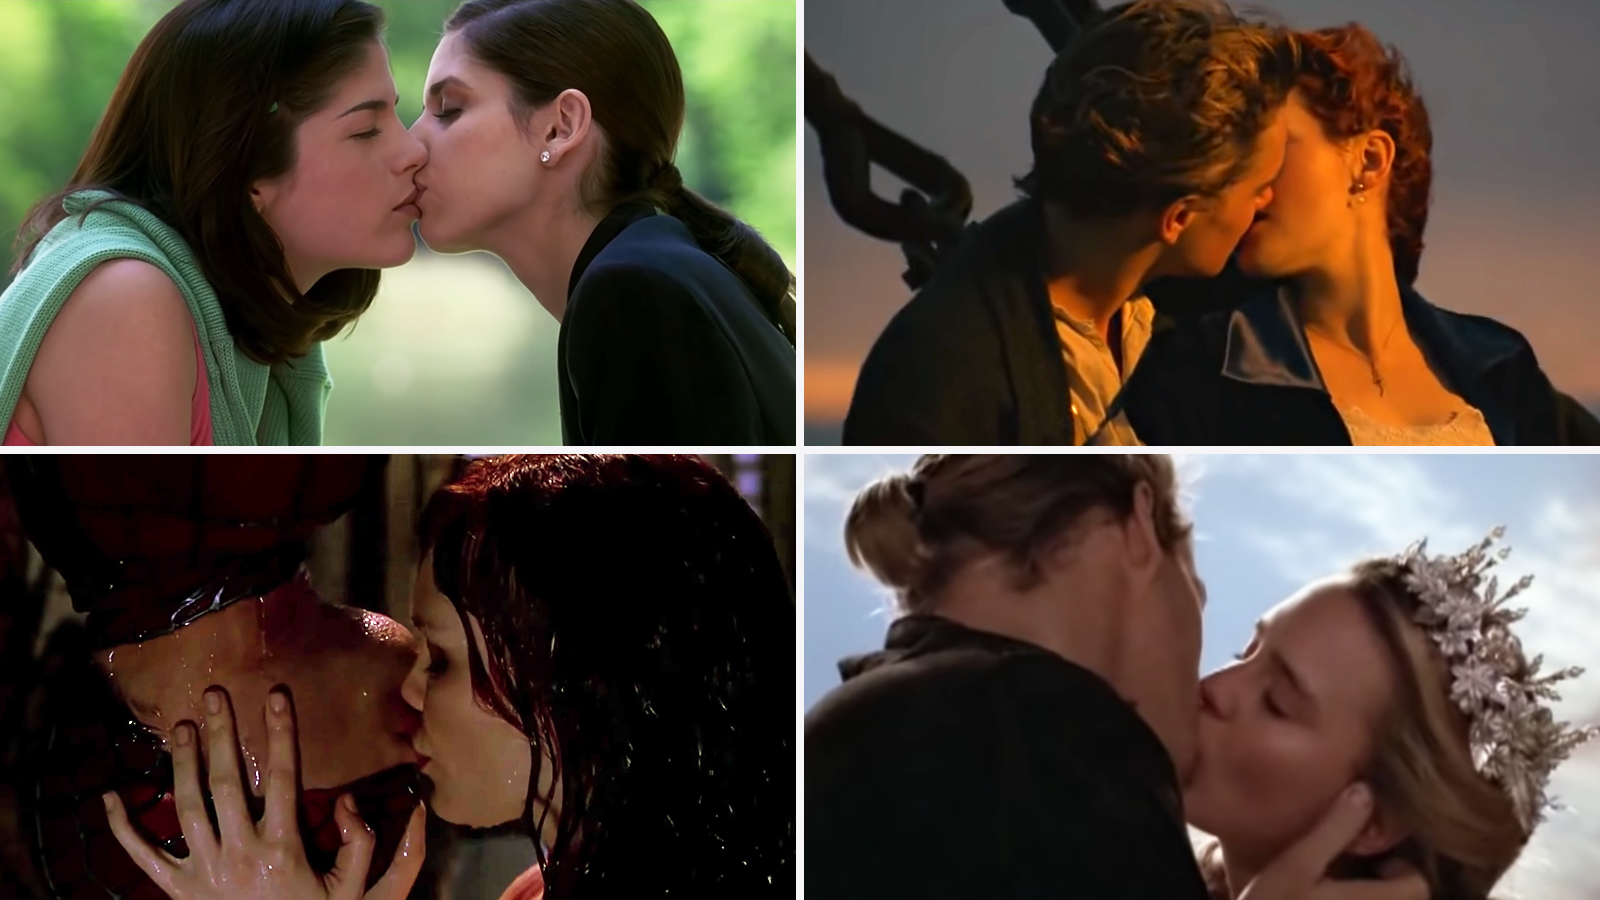 claire rudman recommends anne hathaway lesbian kiss pic